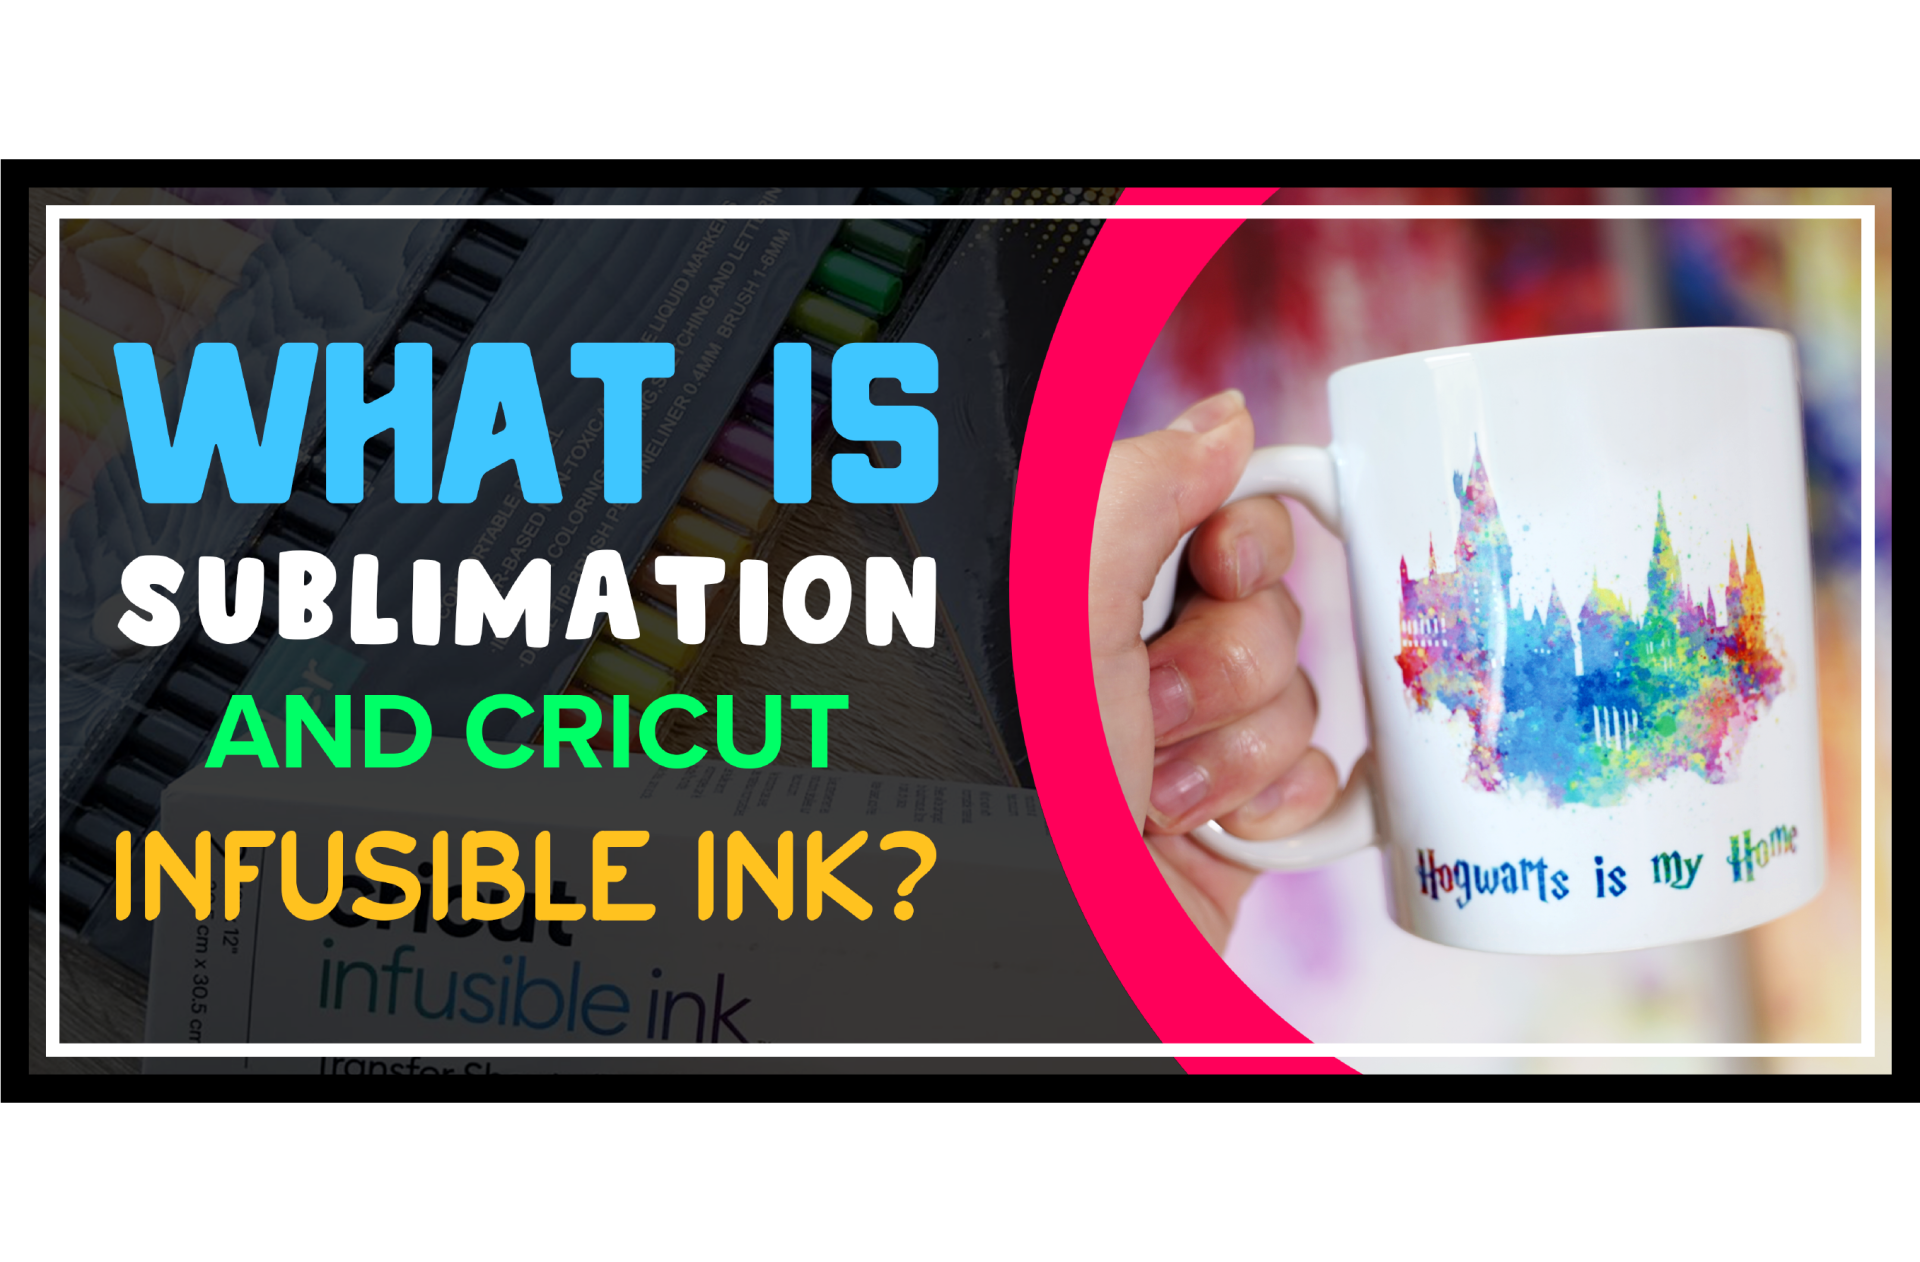 What is Sublimation and Cricut Infusible Ink?